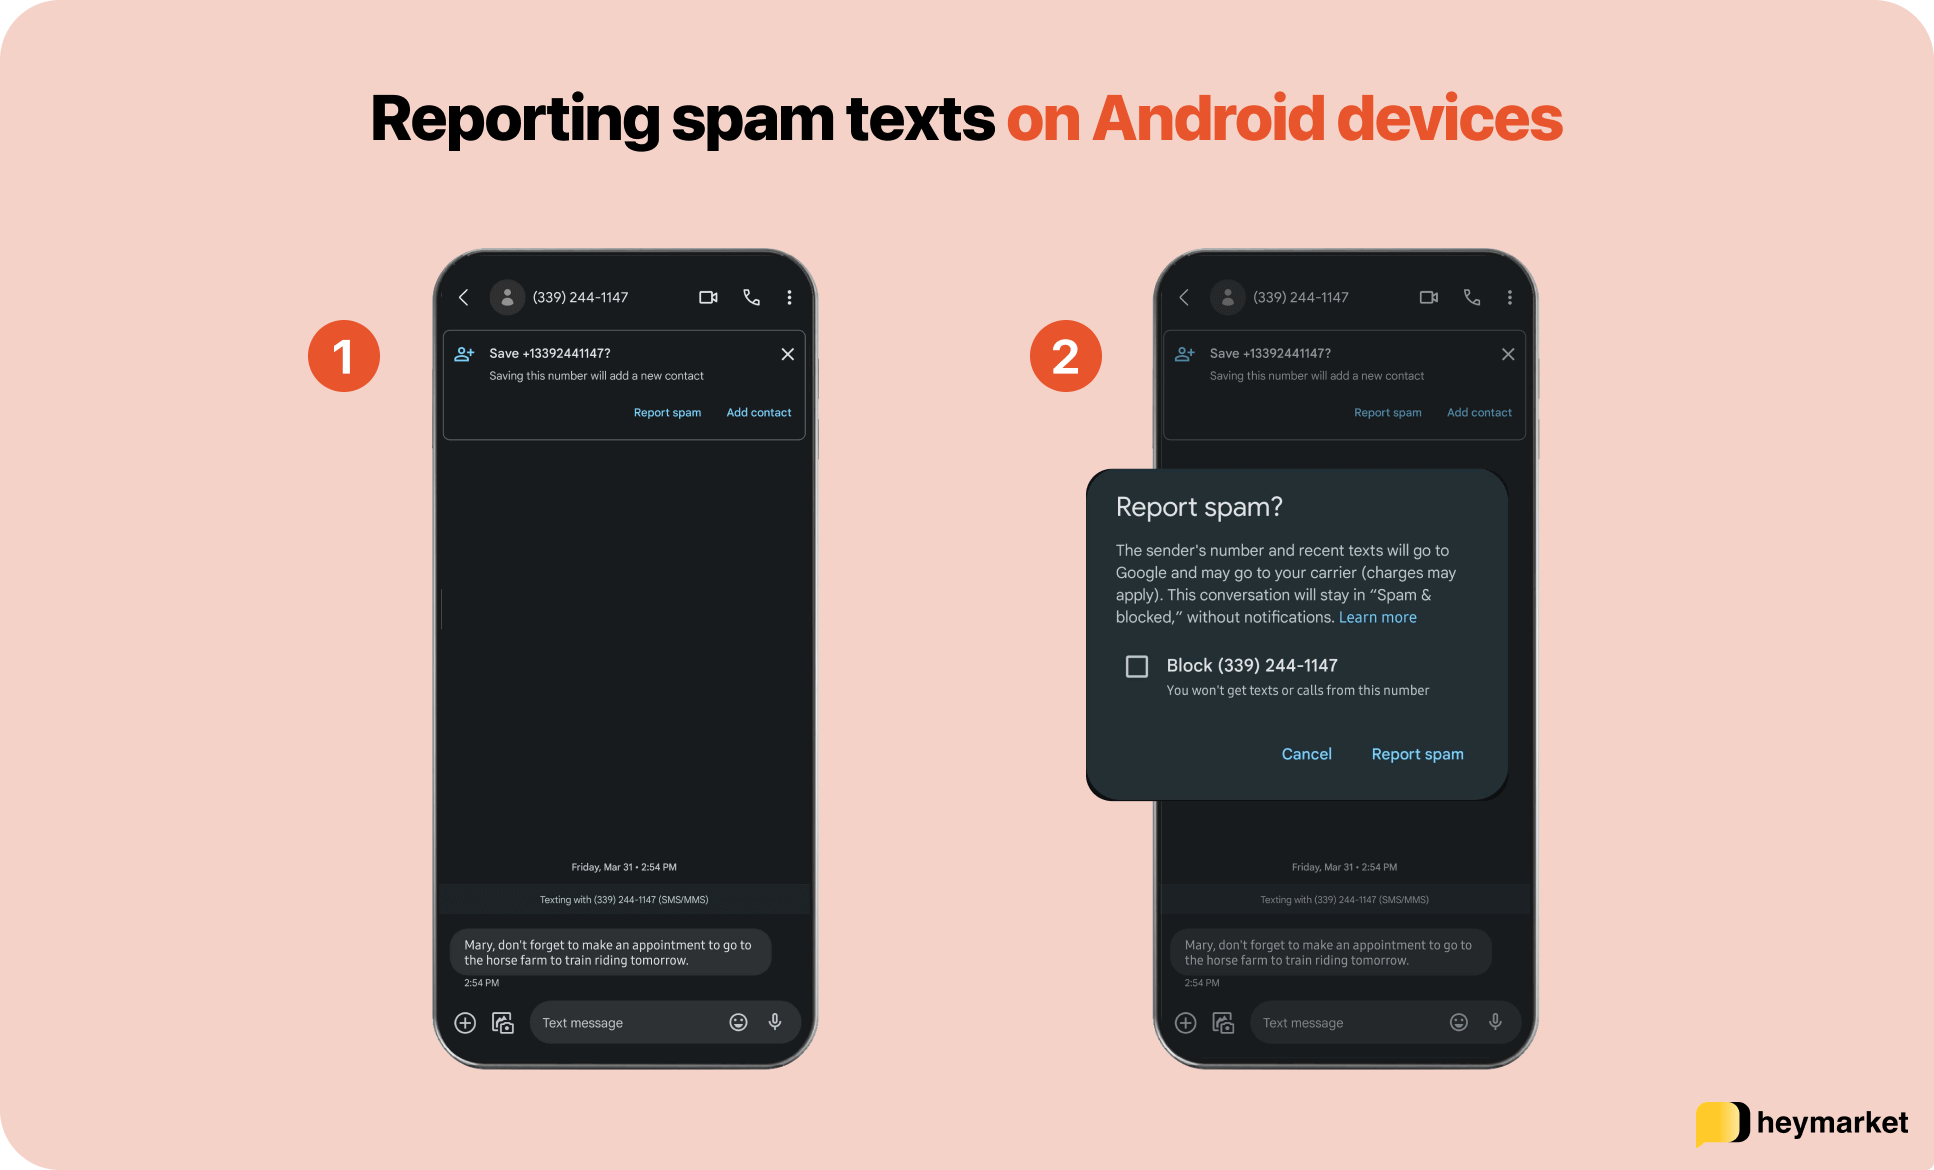 Steps for reporting spam texts using an Android phone